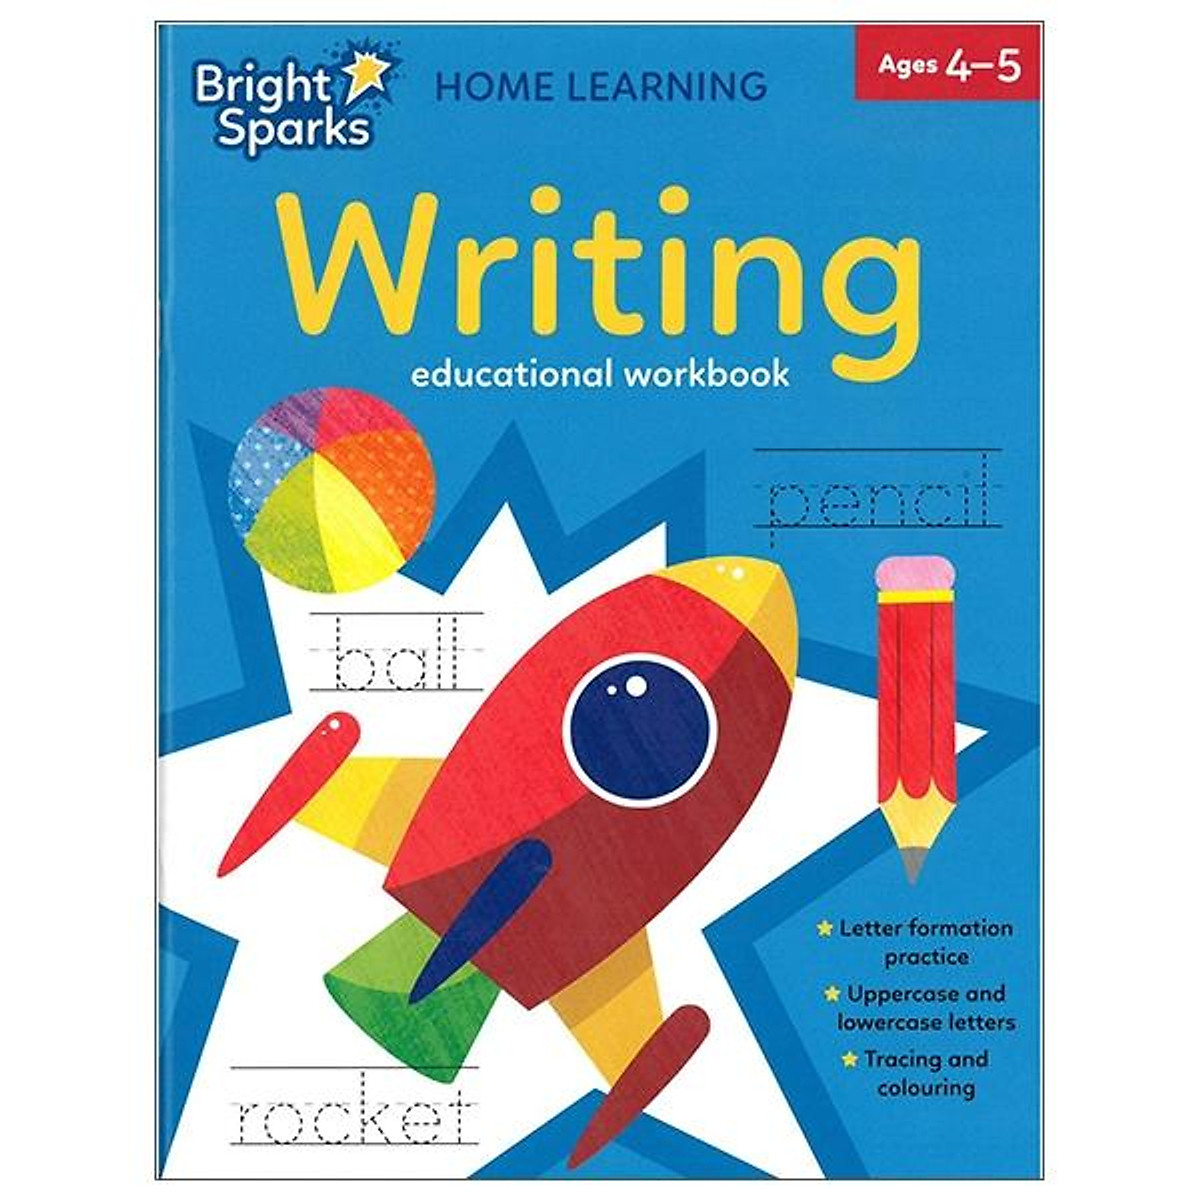 Bright Sparks Writing Educational Workbook Ages 4-5